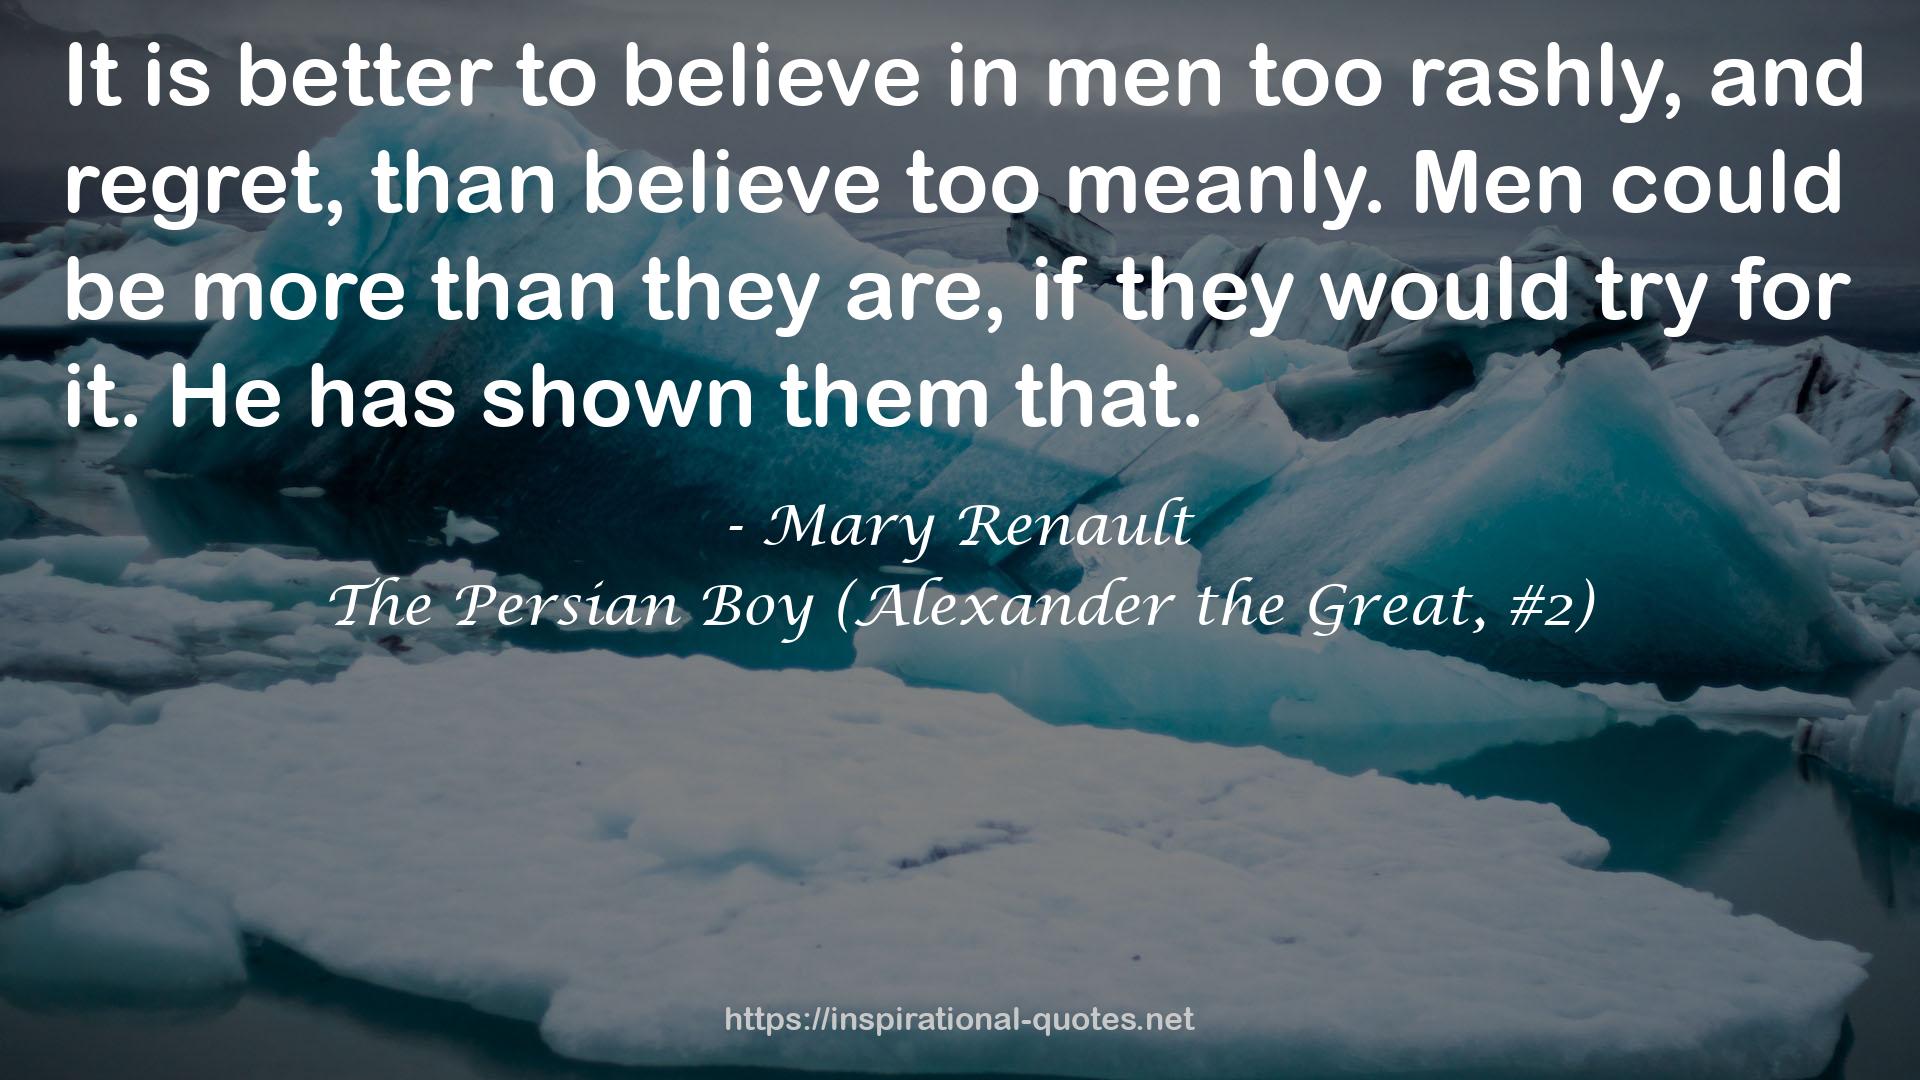 The Persian Boy (Alexander the Great, #2) QUOTES